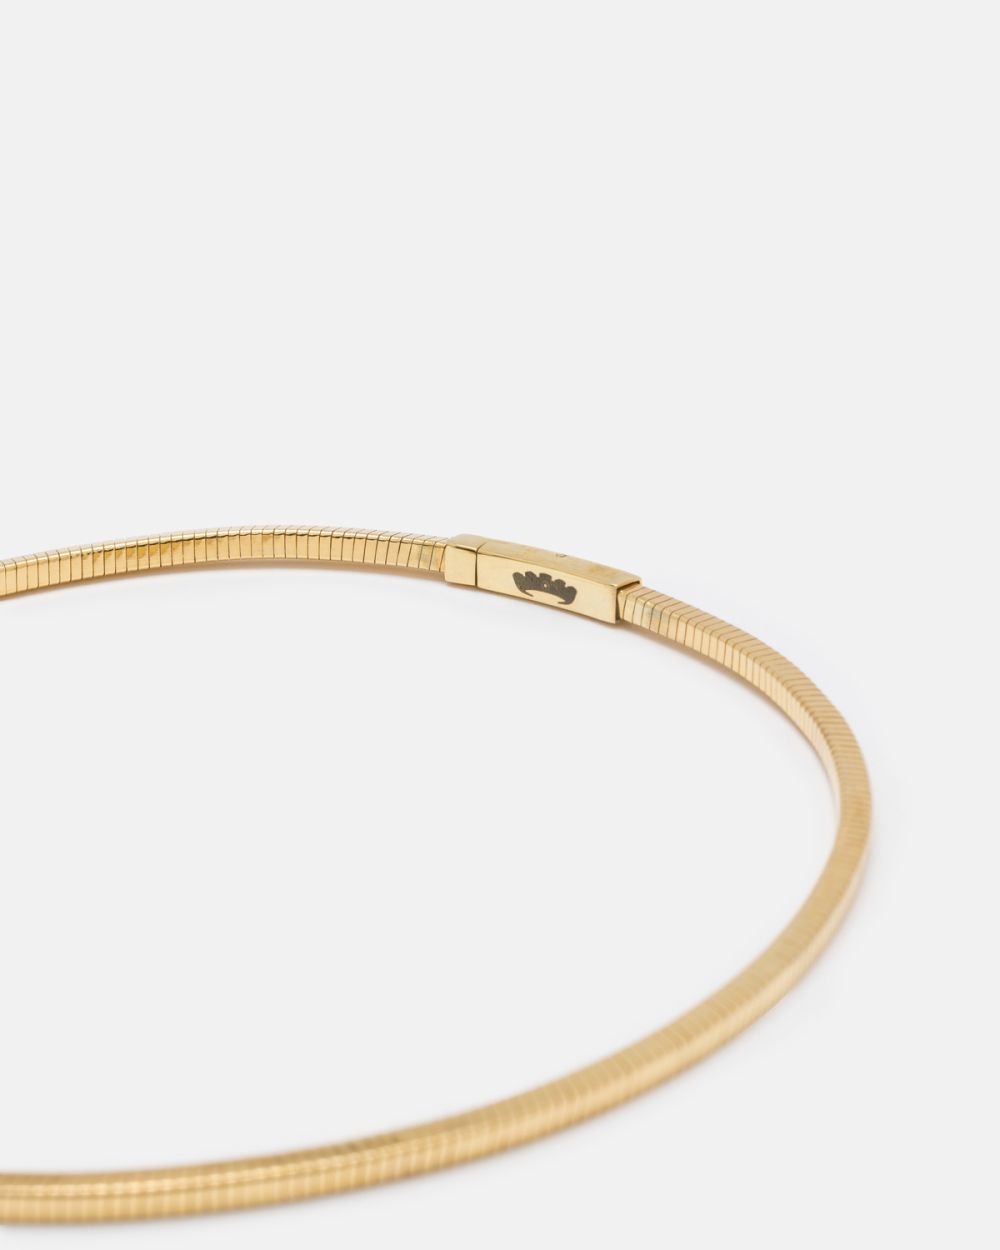 Distinct Necklace in Gold Plated Silver